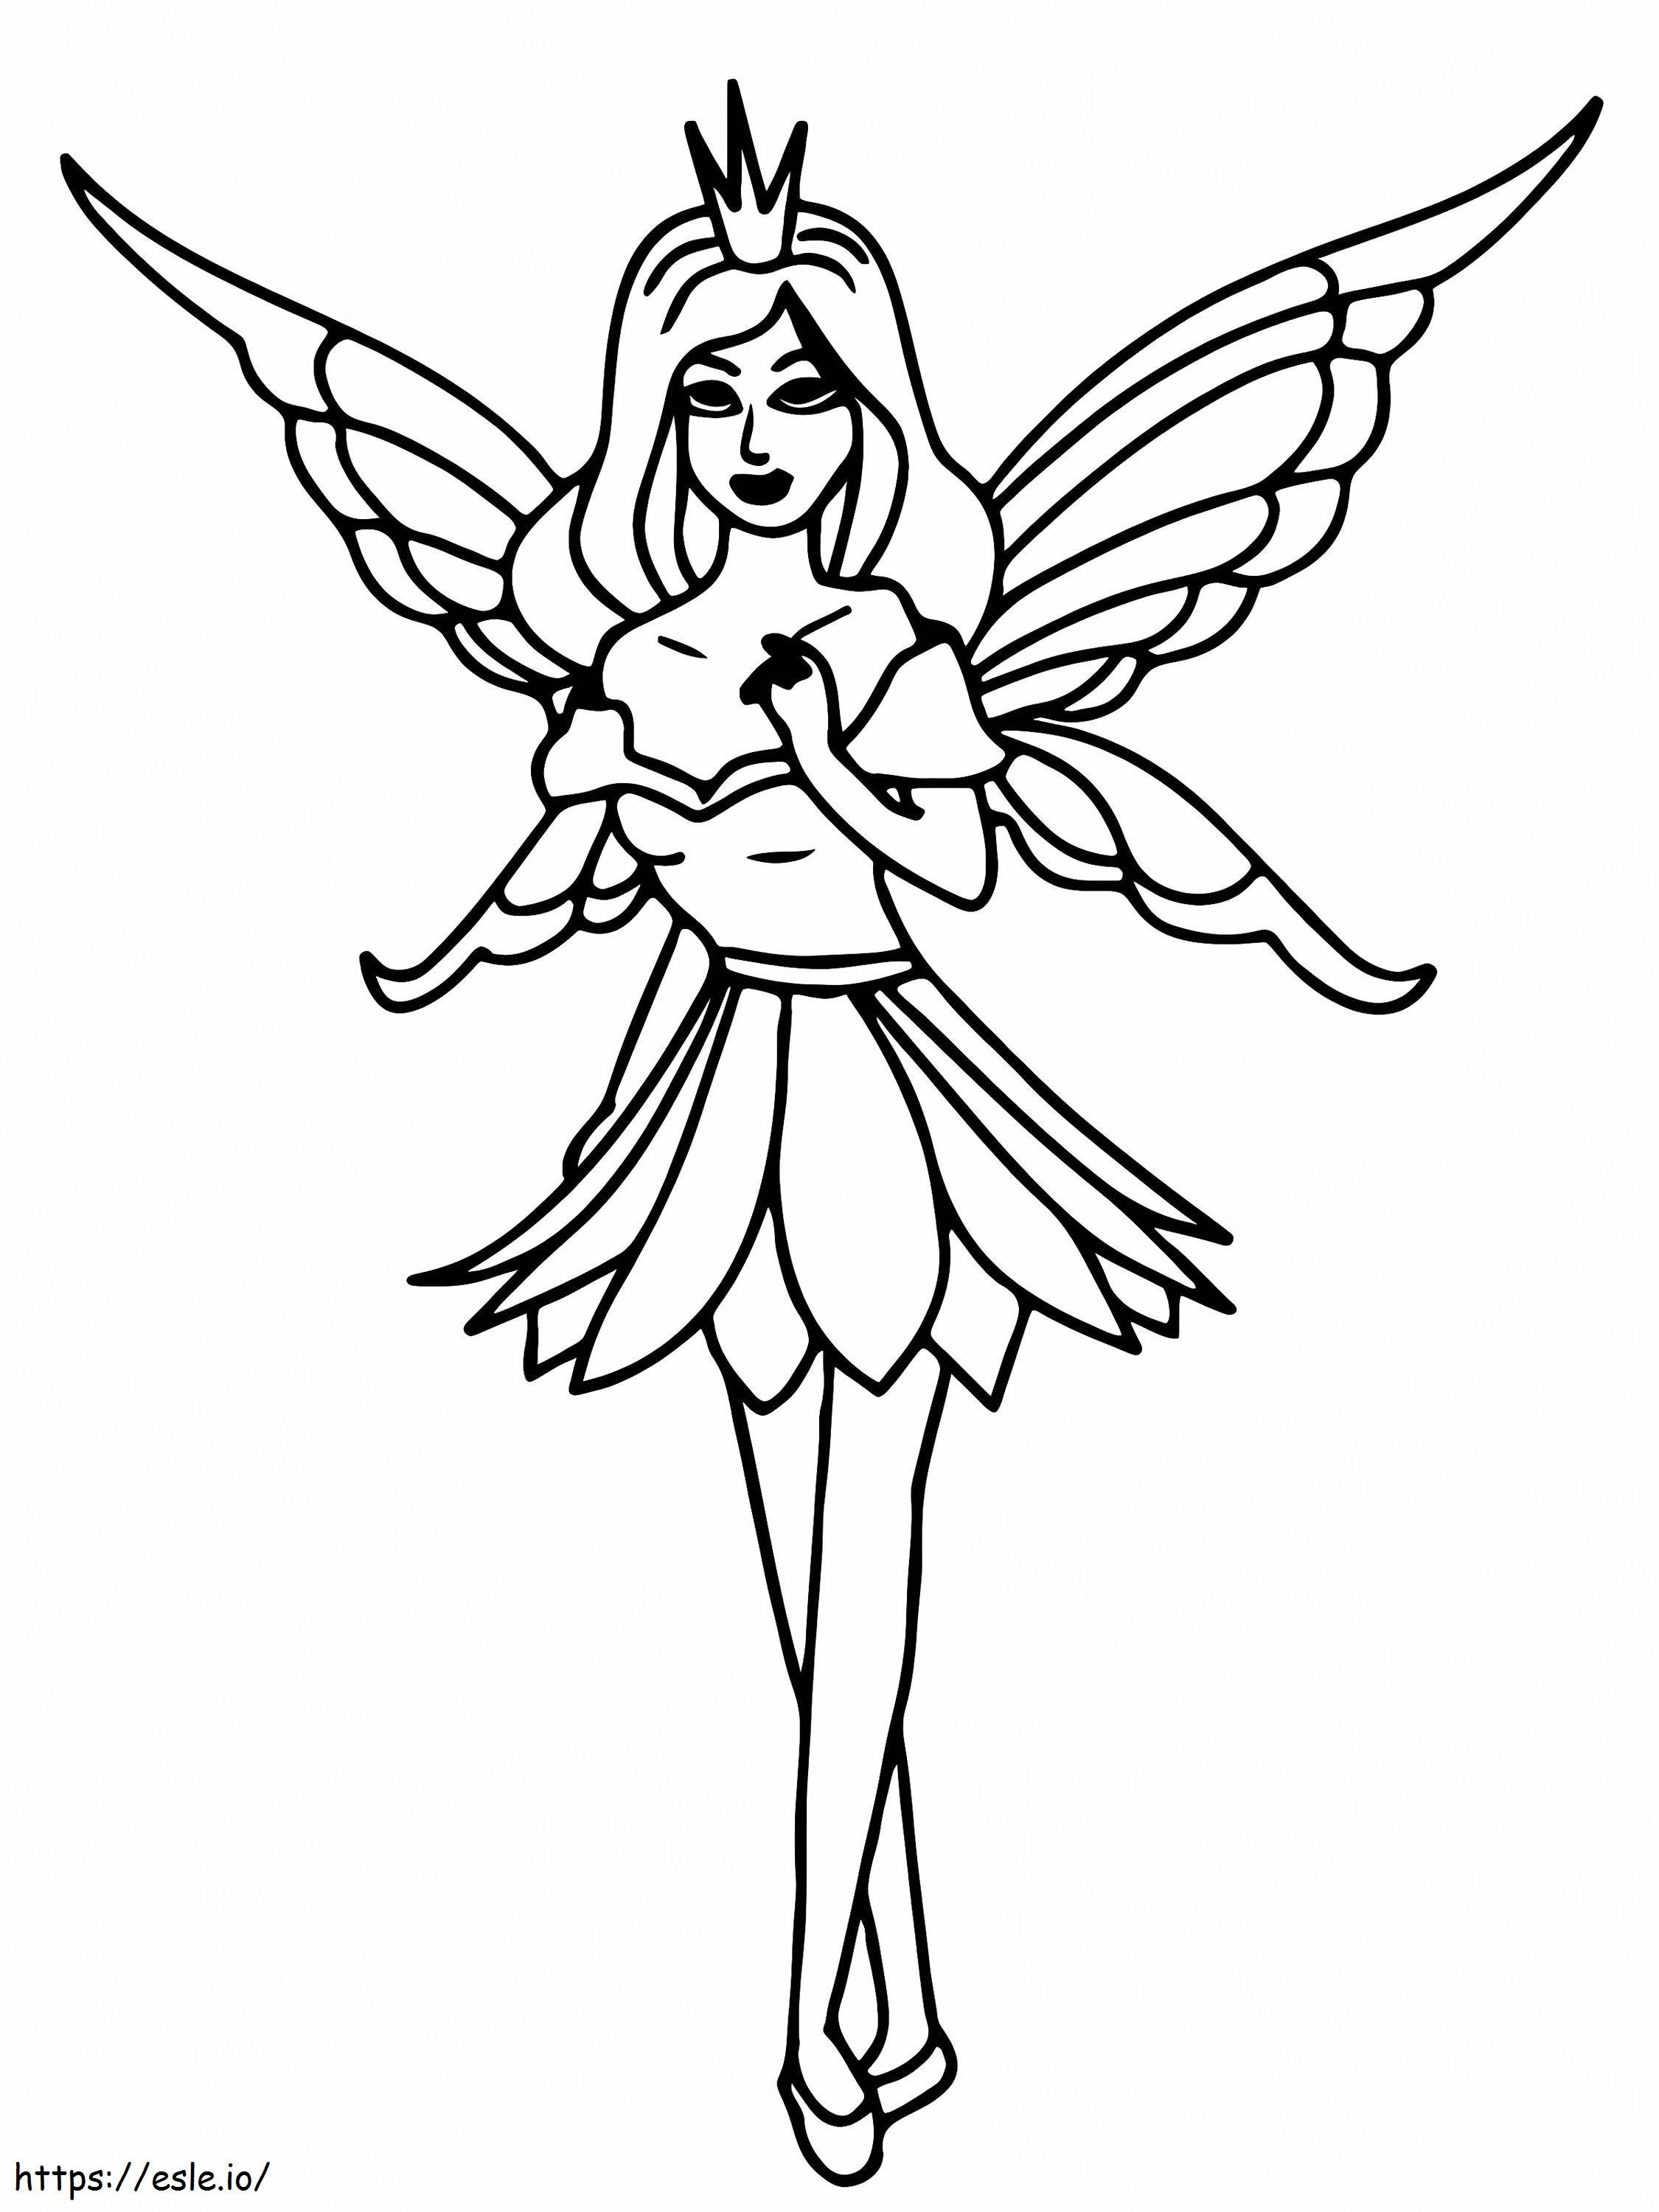 Simple Fairy Princess coloring page